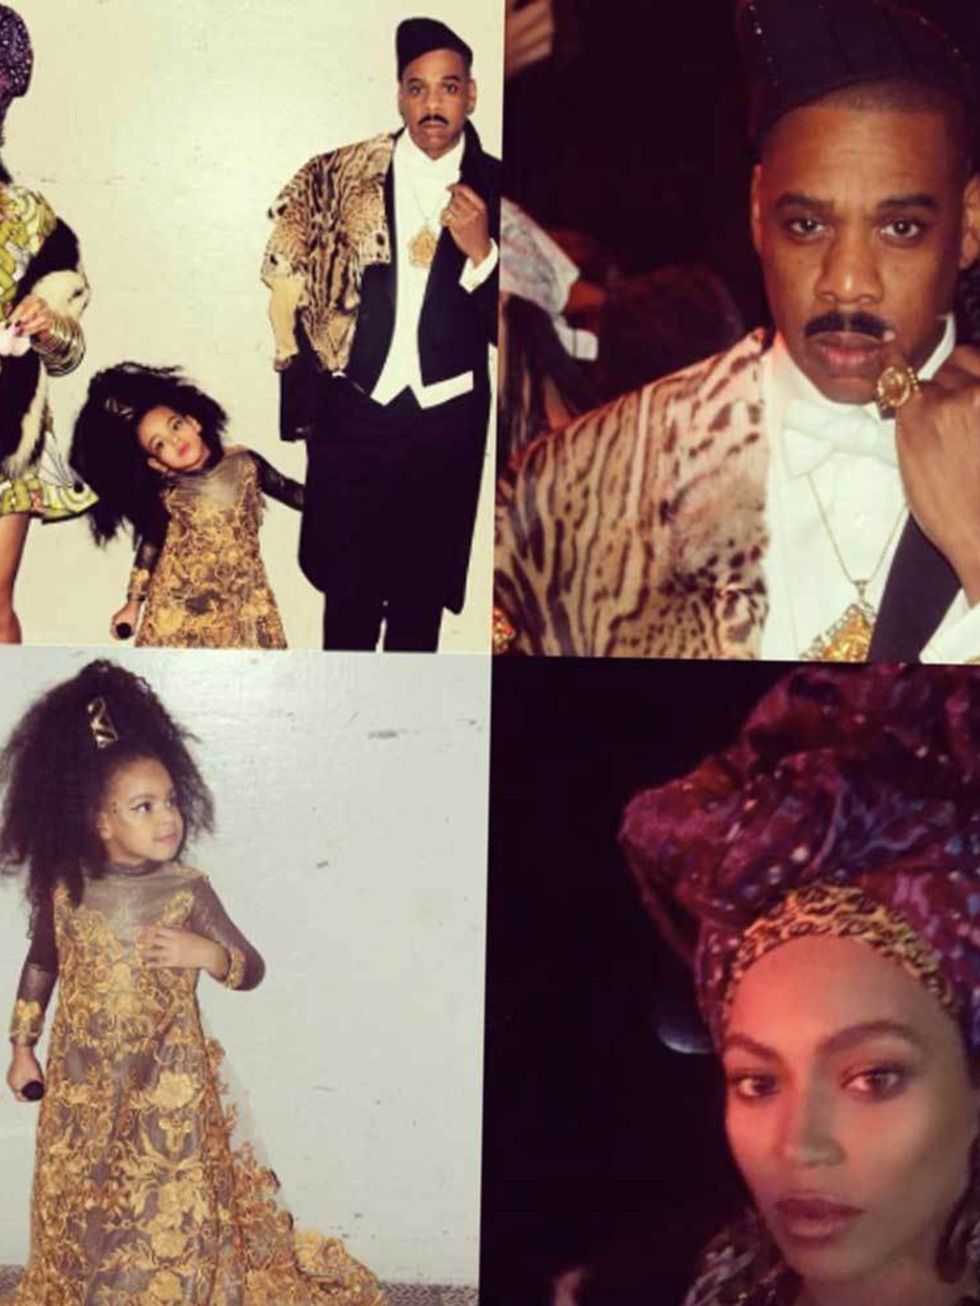 Beyoncé as Queen Aoleon, Jay-Z as Prince Akeem and Blue Ivy as Imani Izzi from Coming To America